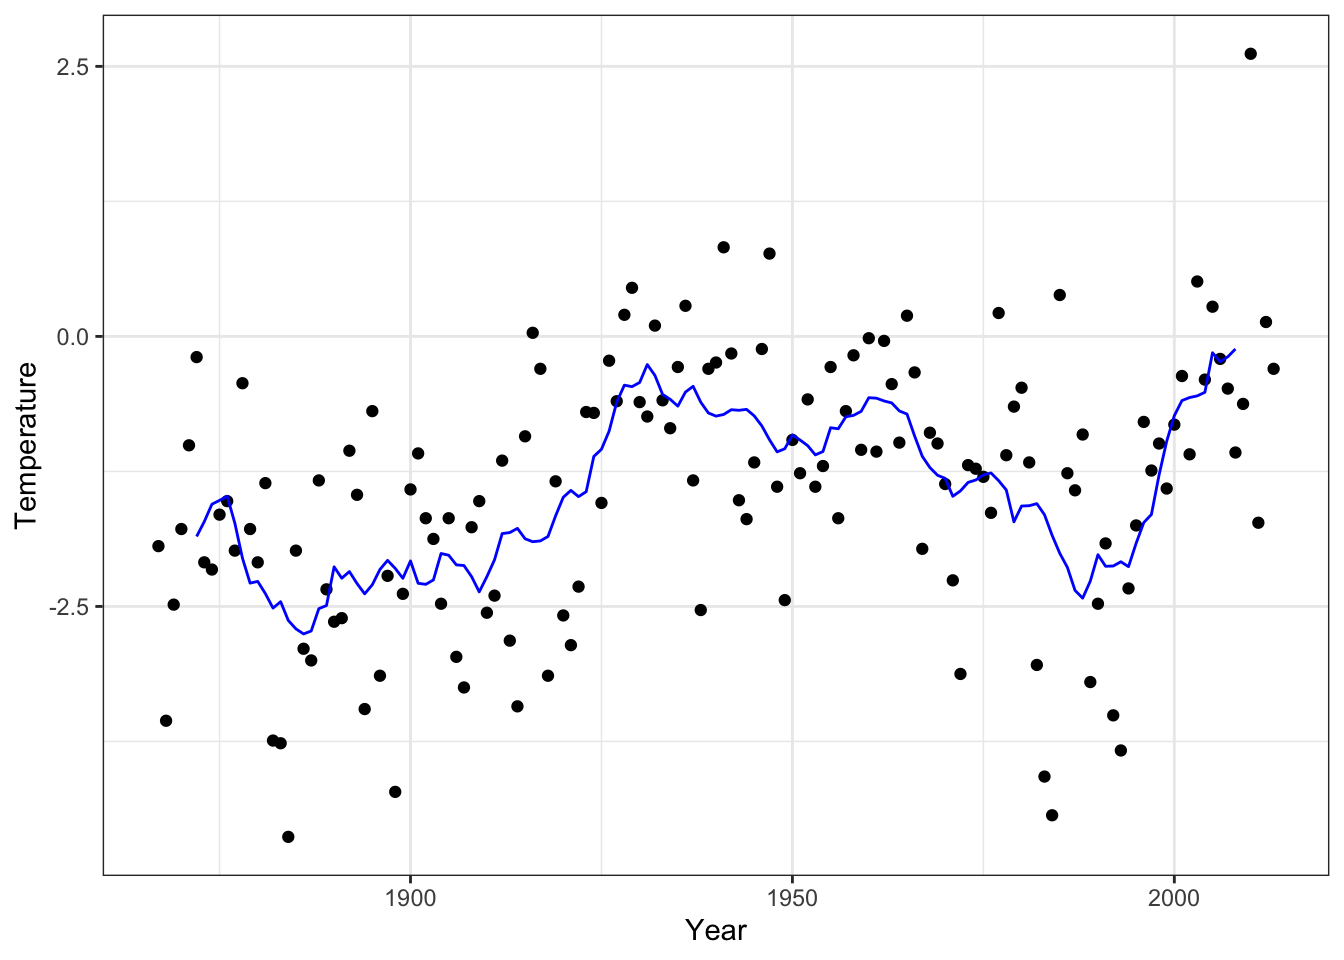 Annual average temperature in Nuuk smoothed using the running mean with \(k = 11\) neighbors. This time using a different implementation than in Figure 3.2.